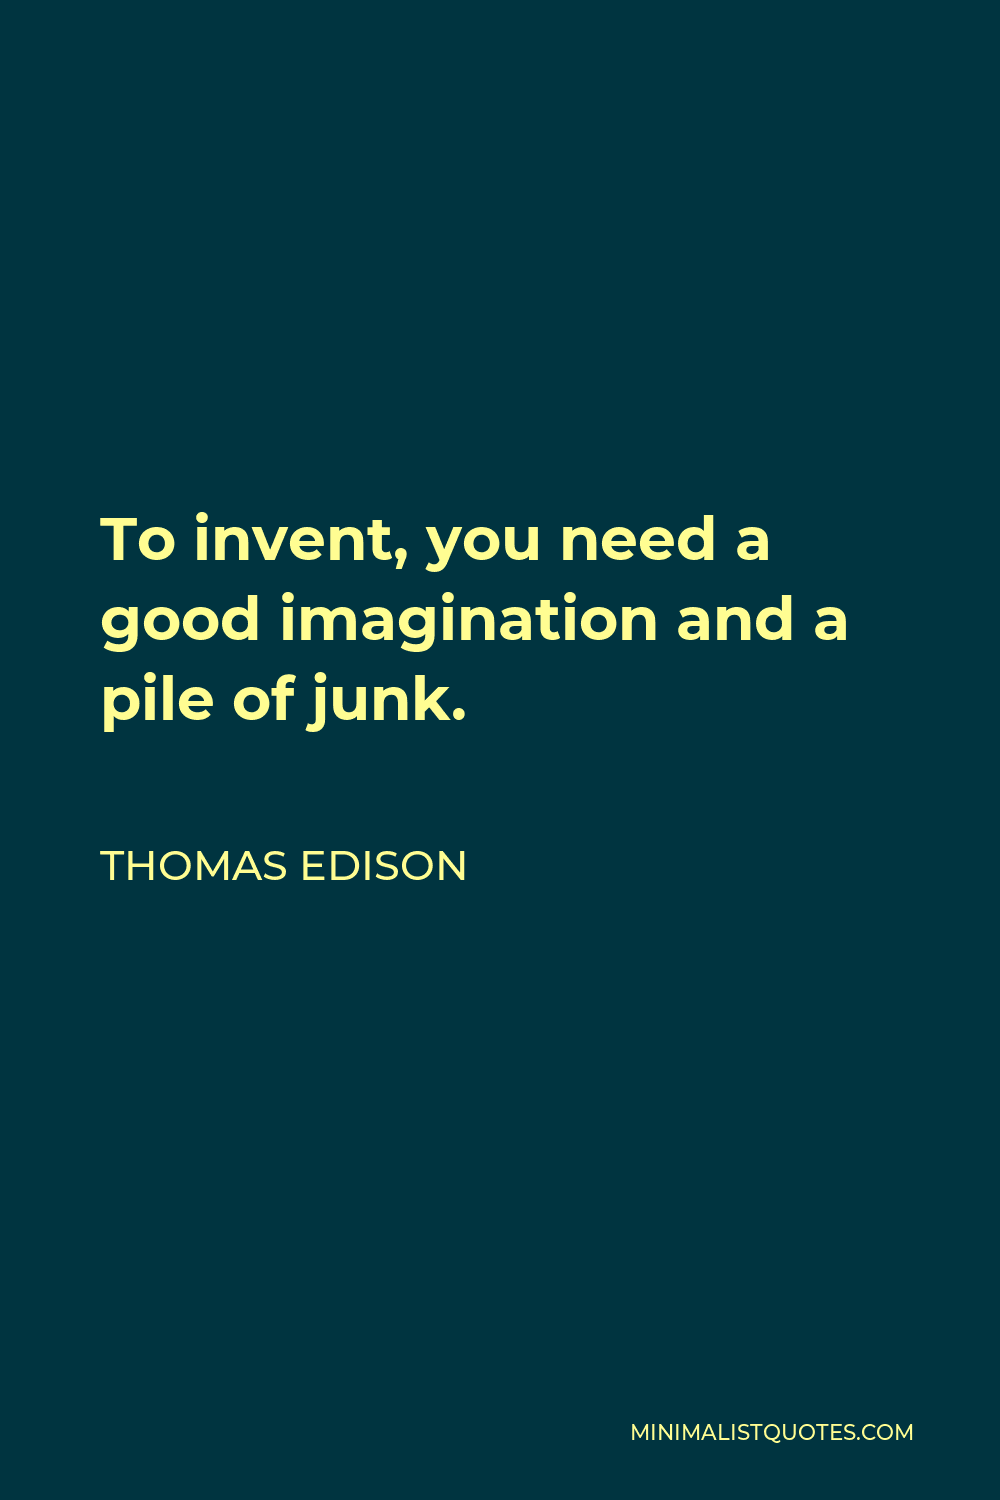 Thomas Edison Quote - To invent, you need a good imagination and a pile of junk.